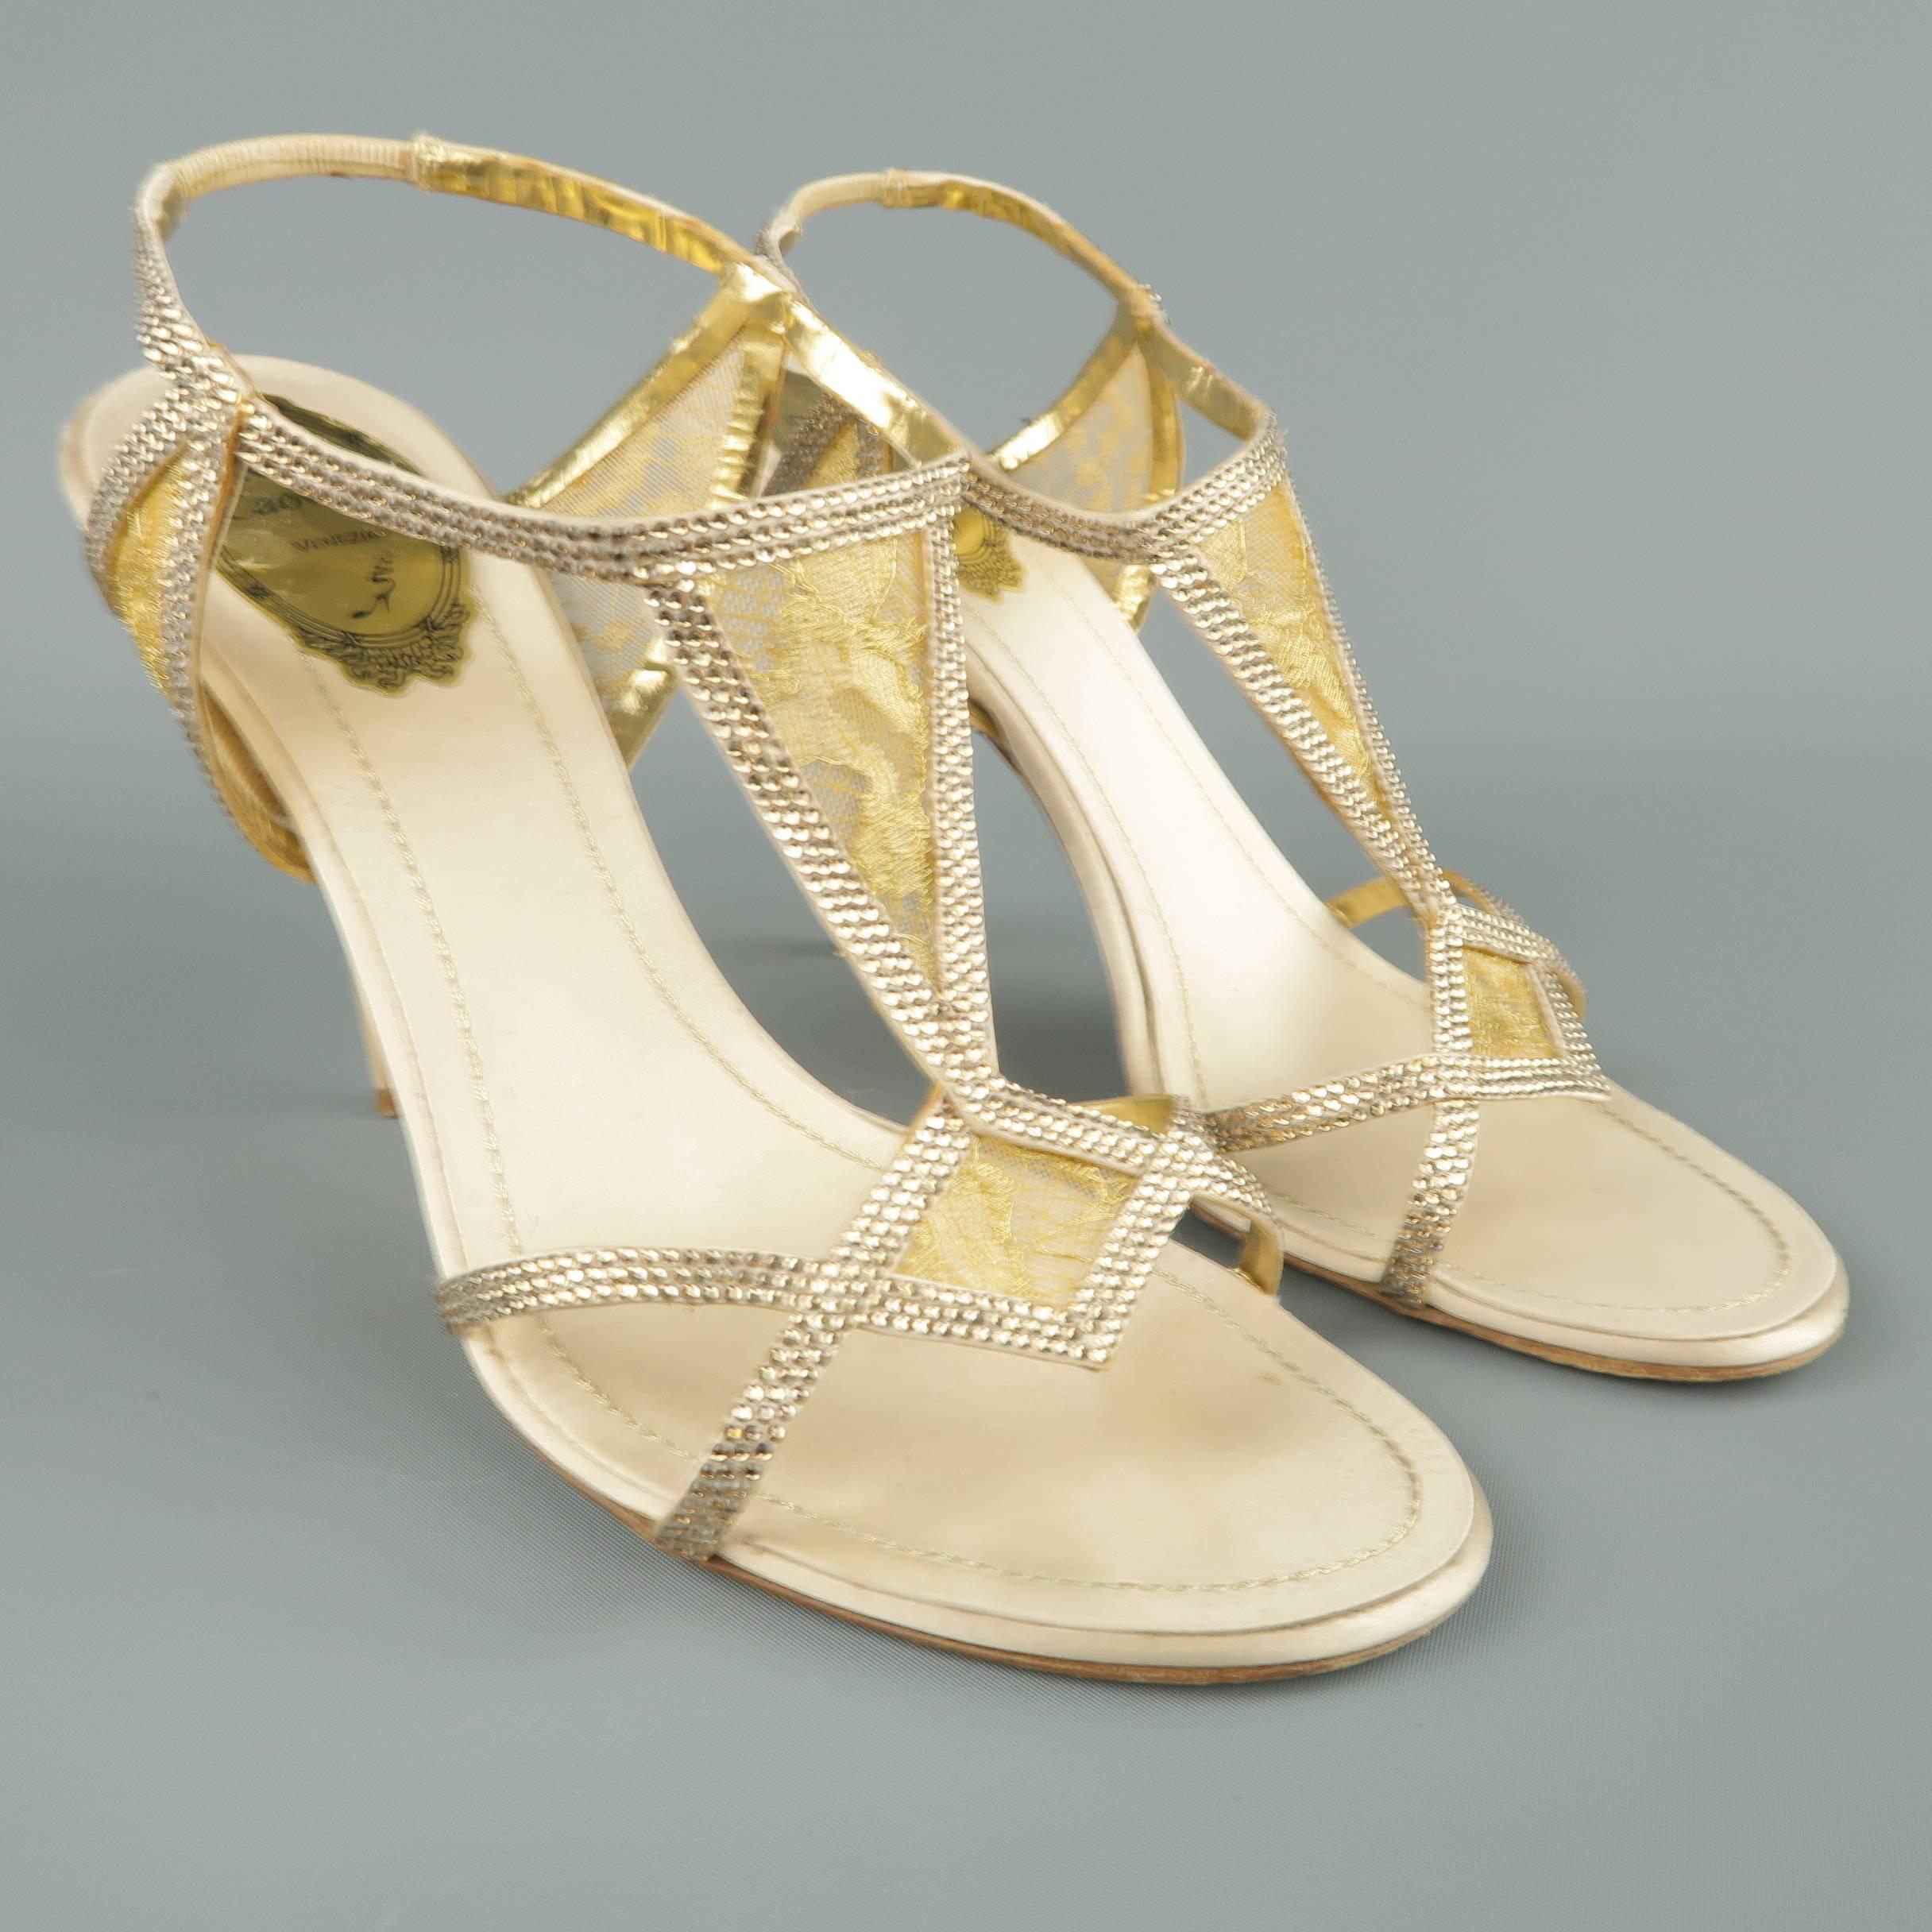 RENE CAOVILLA evening sandals come in a champagne silk satin and feature geometric harness straps with crystal embellishments, gold silk panels, and beige lacquered  stiletto heel. Wear on heels. As-is. Made in Italy.
 
Fair Pre-Owned